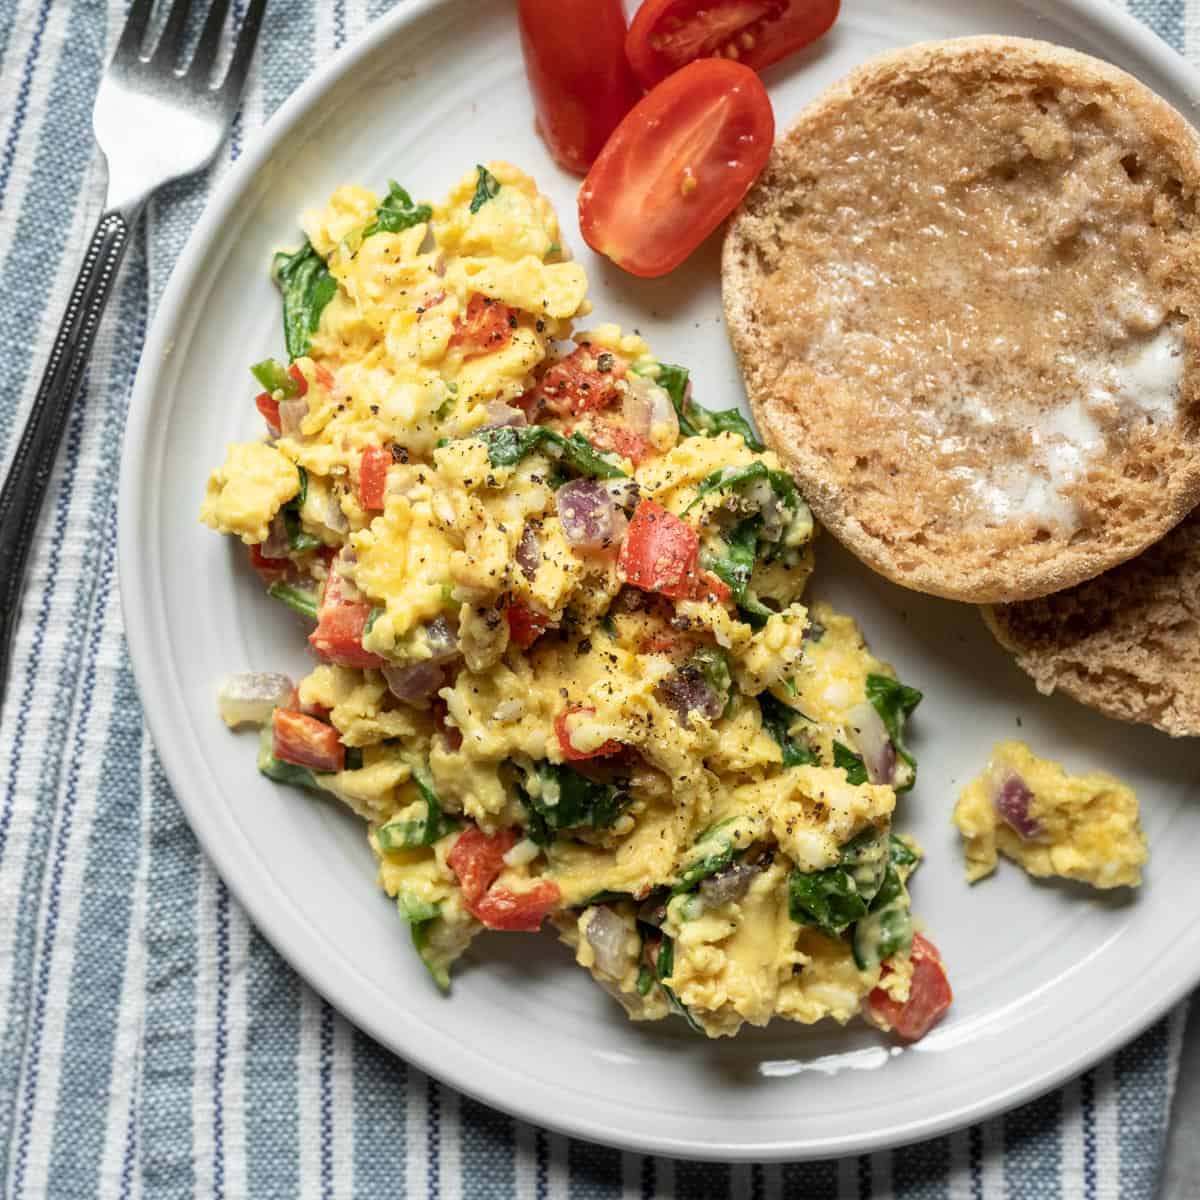 Vegan breakfast scramble on plate with english muffin and tomatoes.